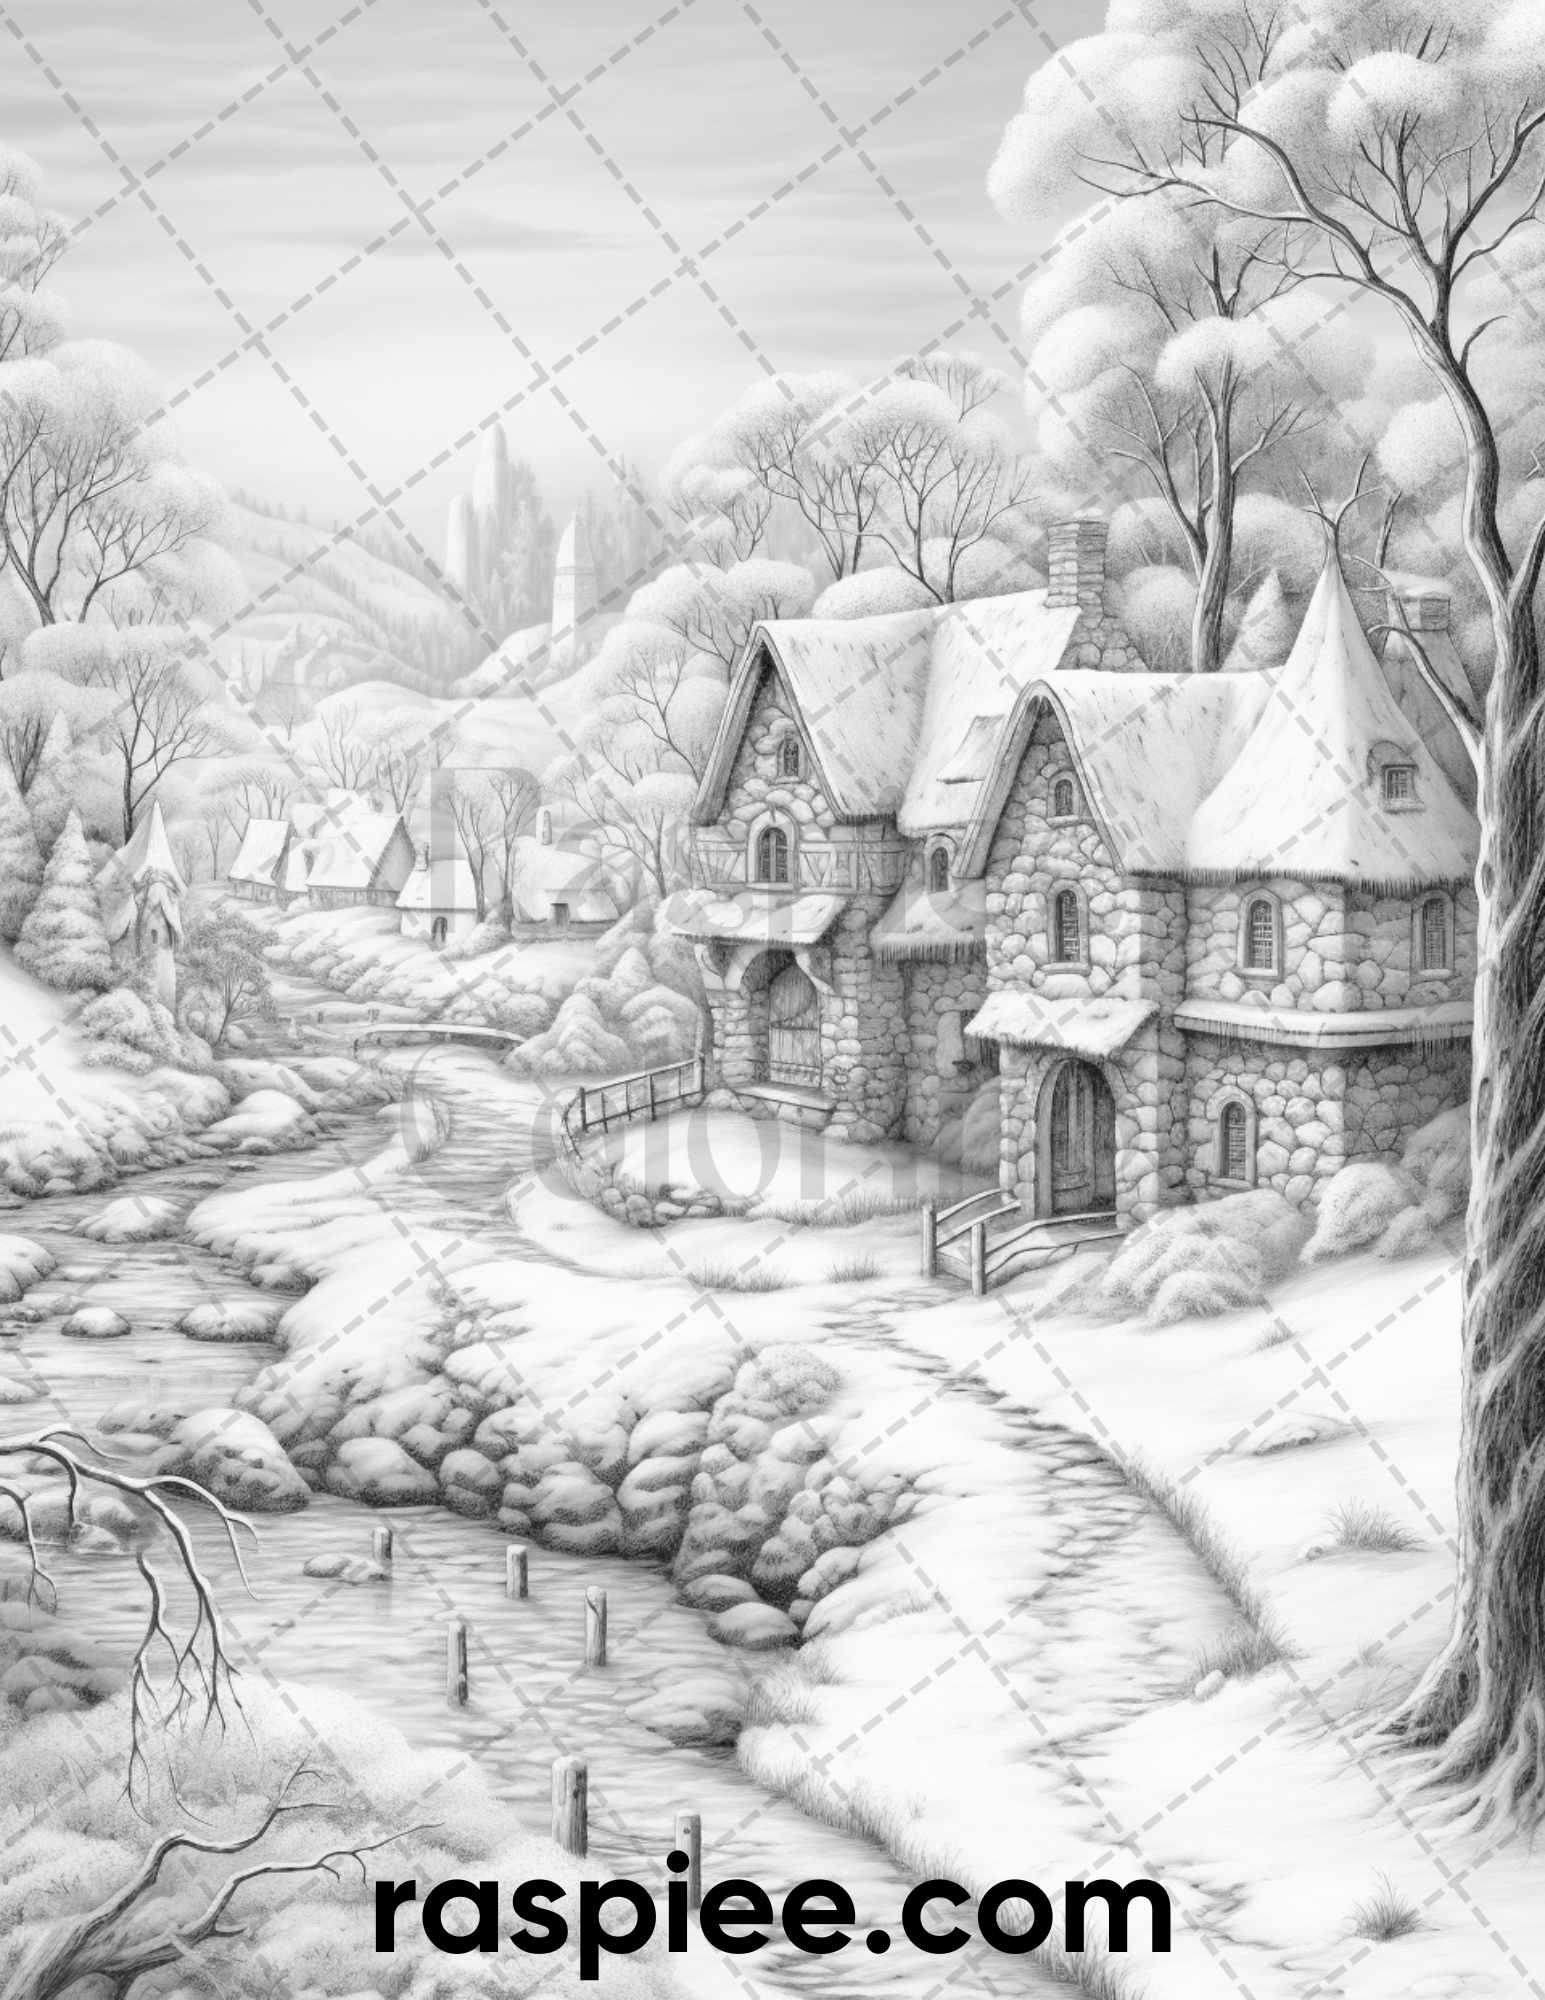 Winter Village Coloring Page, Fantasy Adult Coloring Illustration, Grayscale Coloring Sheet, Detailed Coloring Artwork, Relaxing Coloring Activity, Instant Download Coloring Print, Winter Landscape Coloring Pages, Holiday Coloring Book Page, DIY Coloring Gift Idea, Christmas Coloring Pages, Stress-Relief Coloring Page, Winter-Themed Coloring Printable, Fantasy Coloring Pages